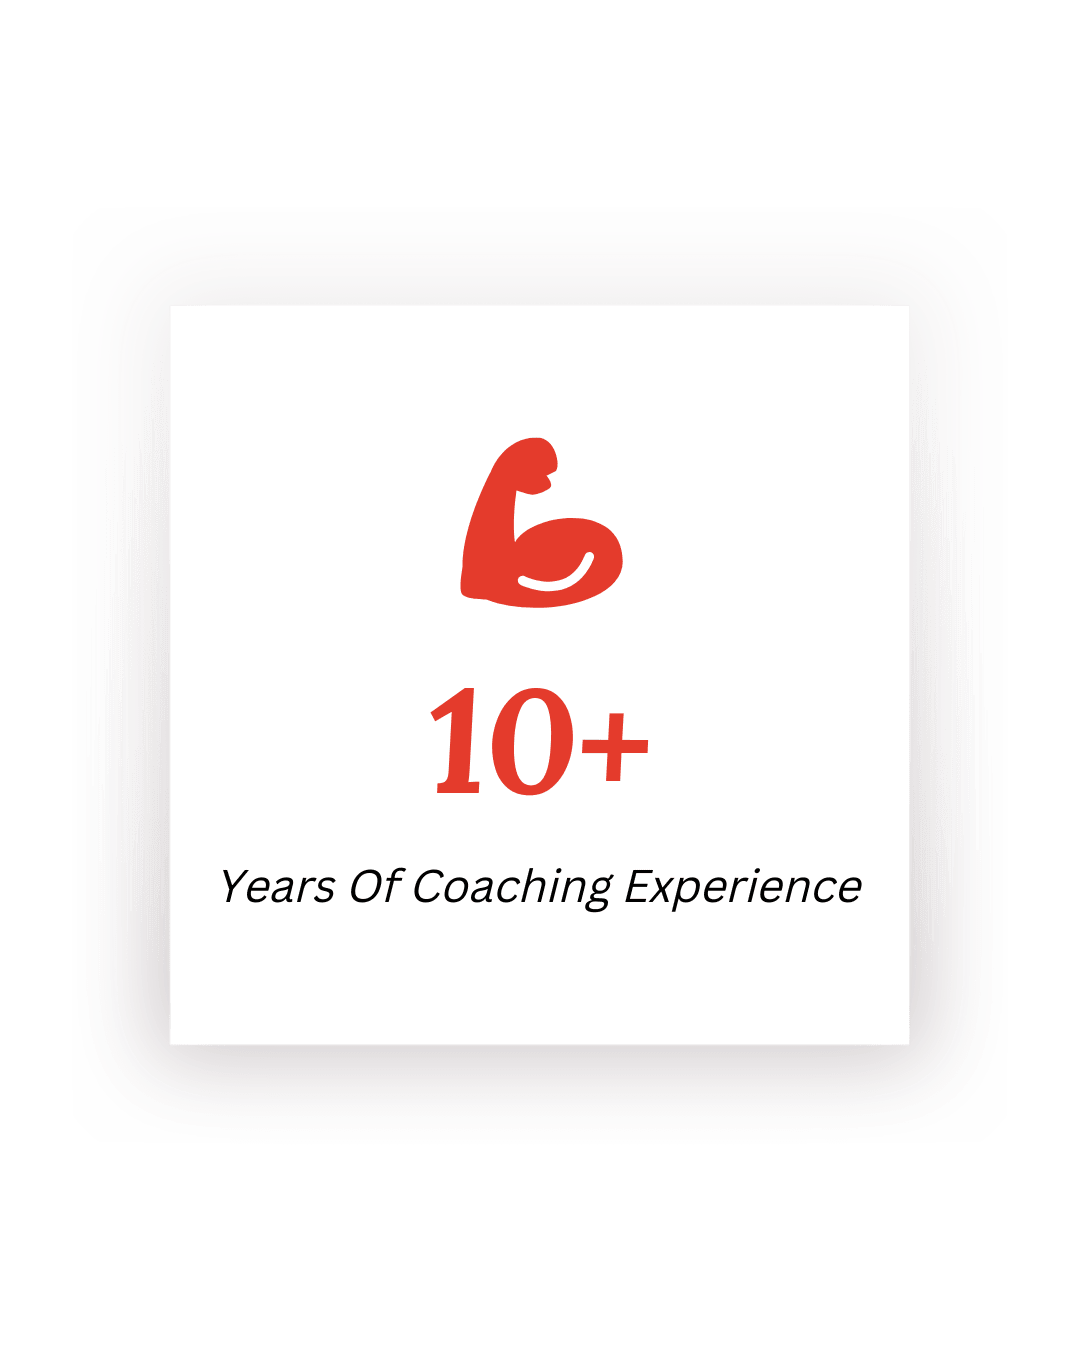 10+ Years Of Coaching Experience